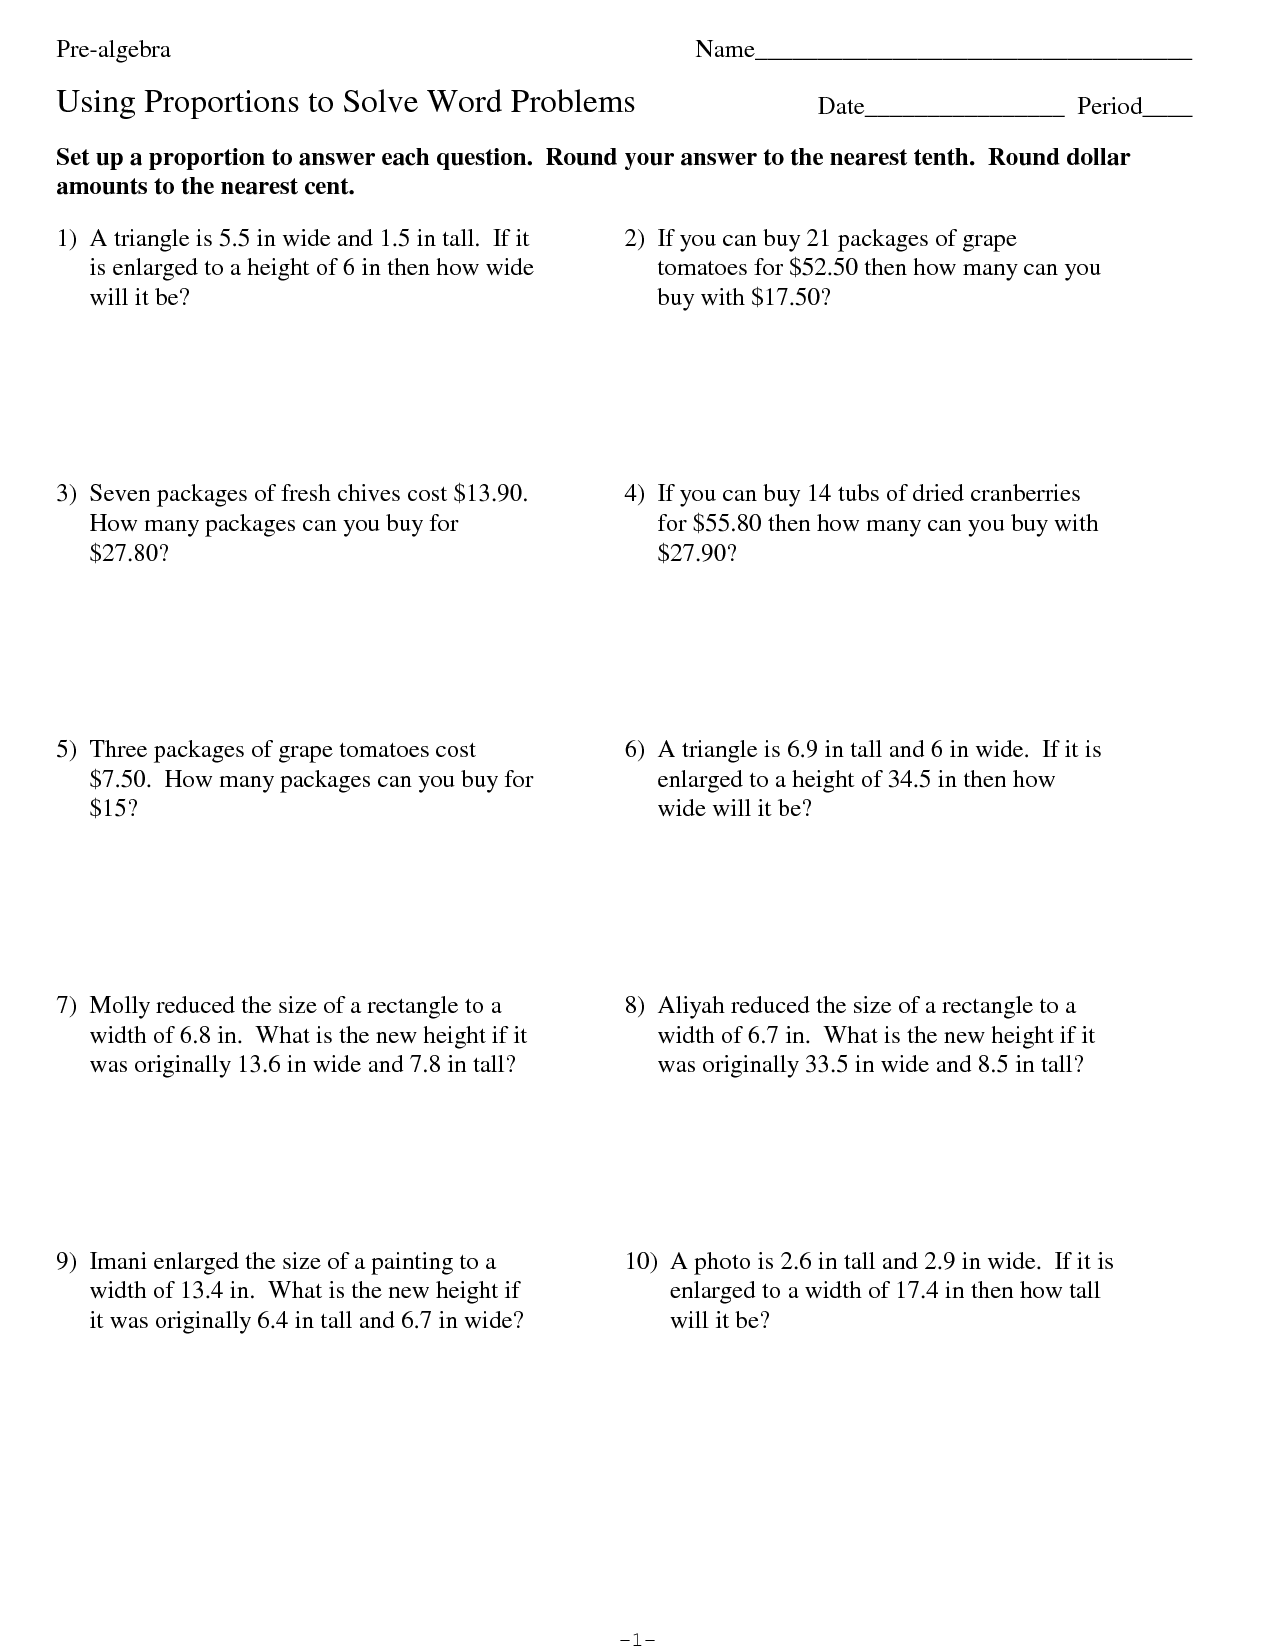 18 Best Images of Solving Proportions Worksheets 6th Grade - 6th Grade